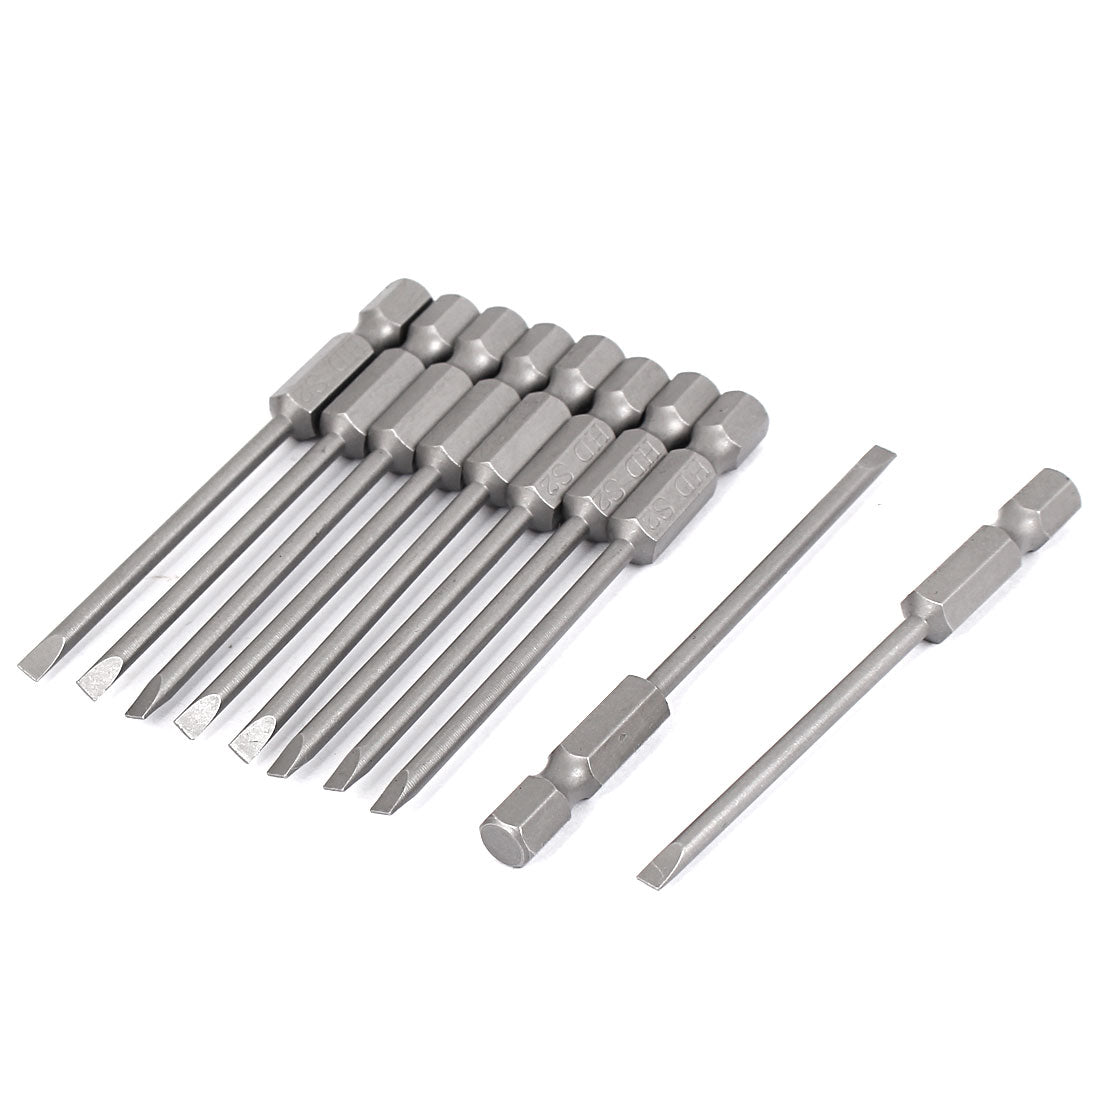 uxcell Uxcell 1/4"x75mmx3mm Hex Shank Magnetic Slotted Screwdriver Bits 10pcs